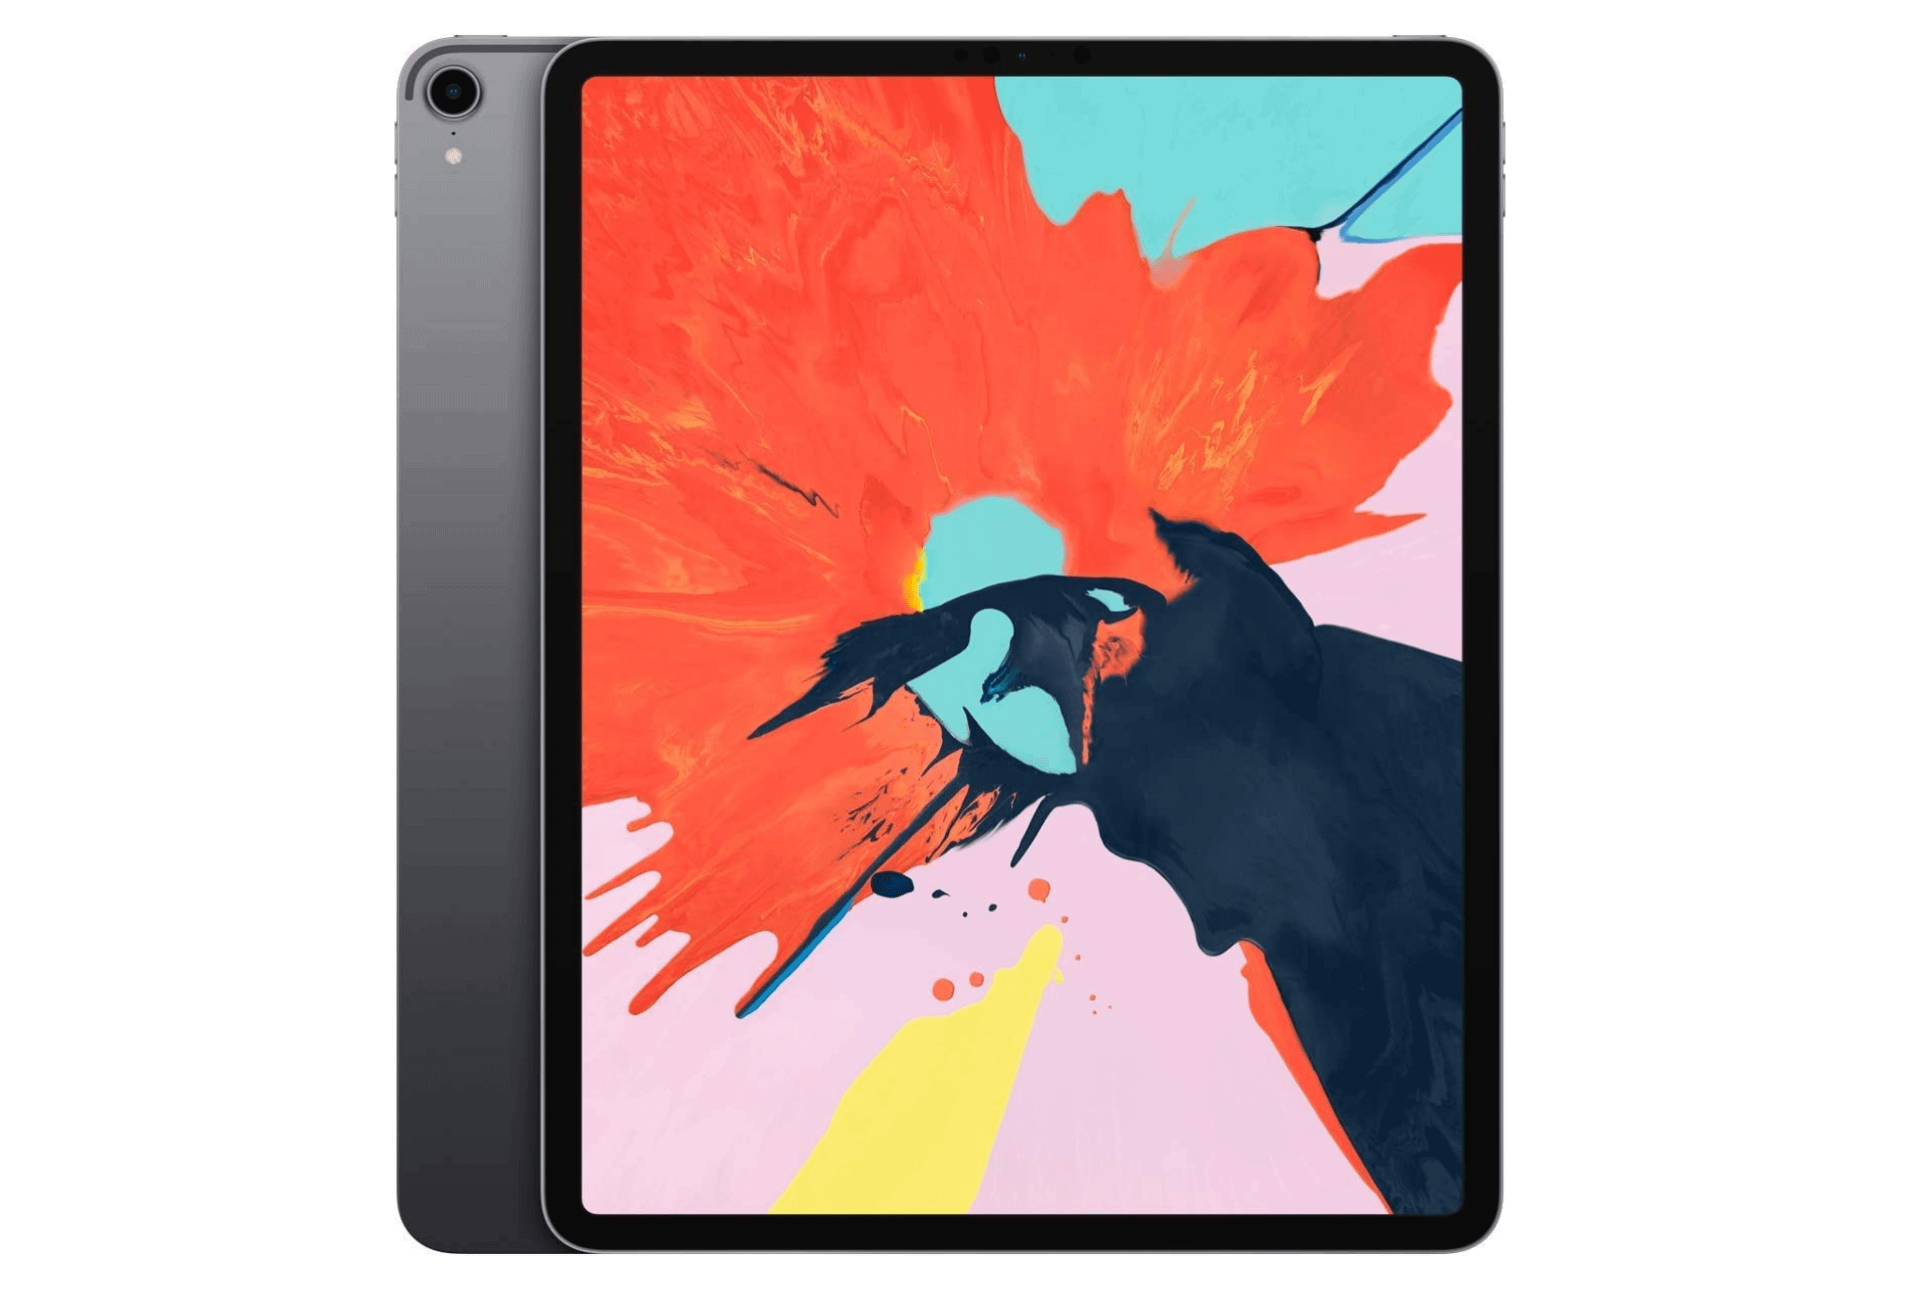 Apple iPad Pro 12.9 3rd Generation Technical Specifications